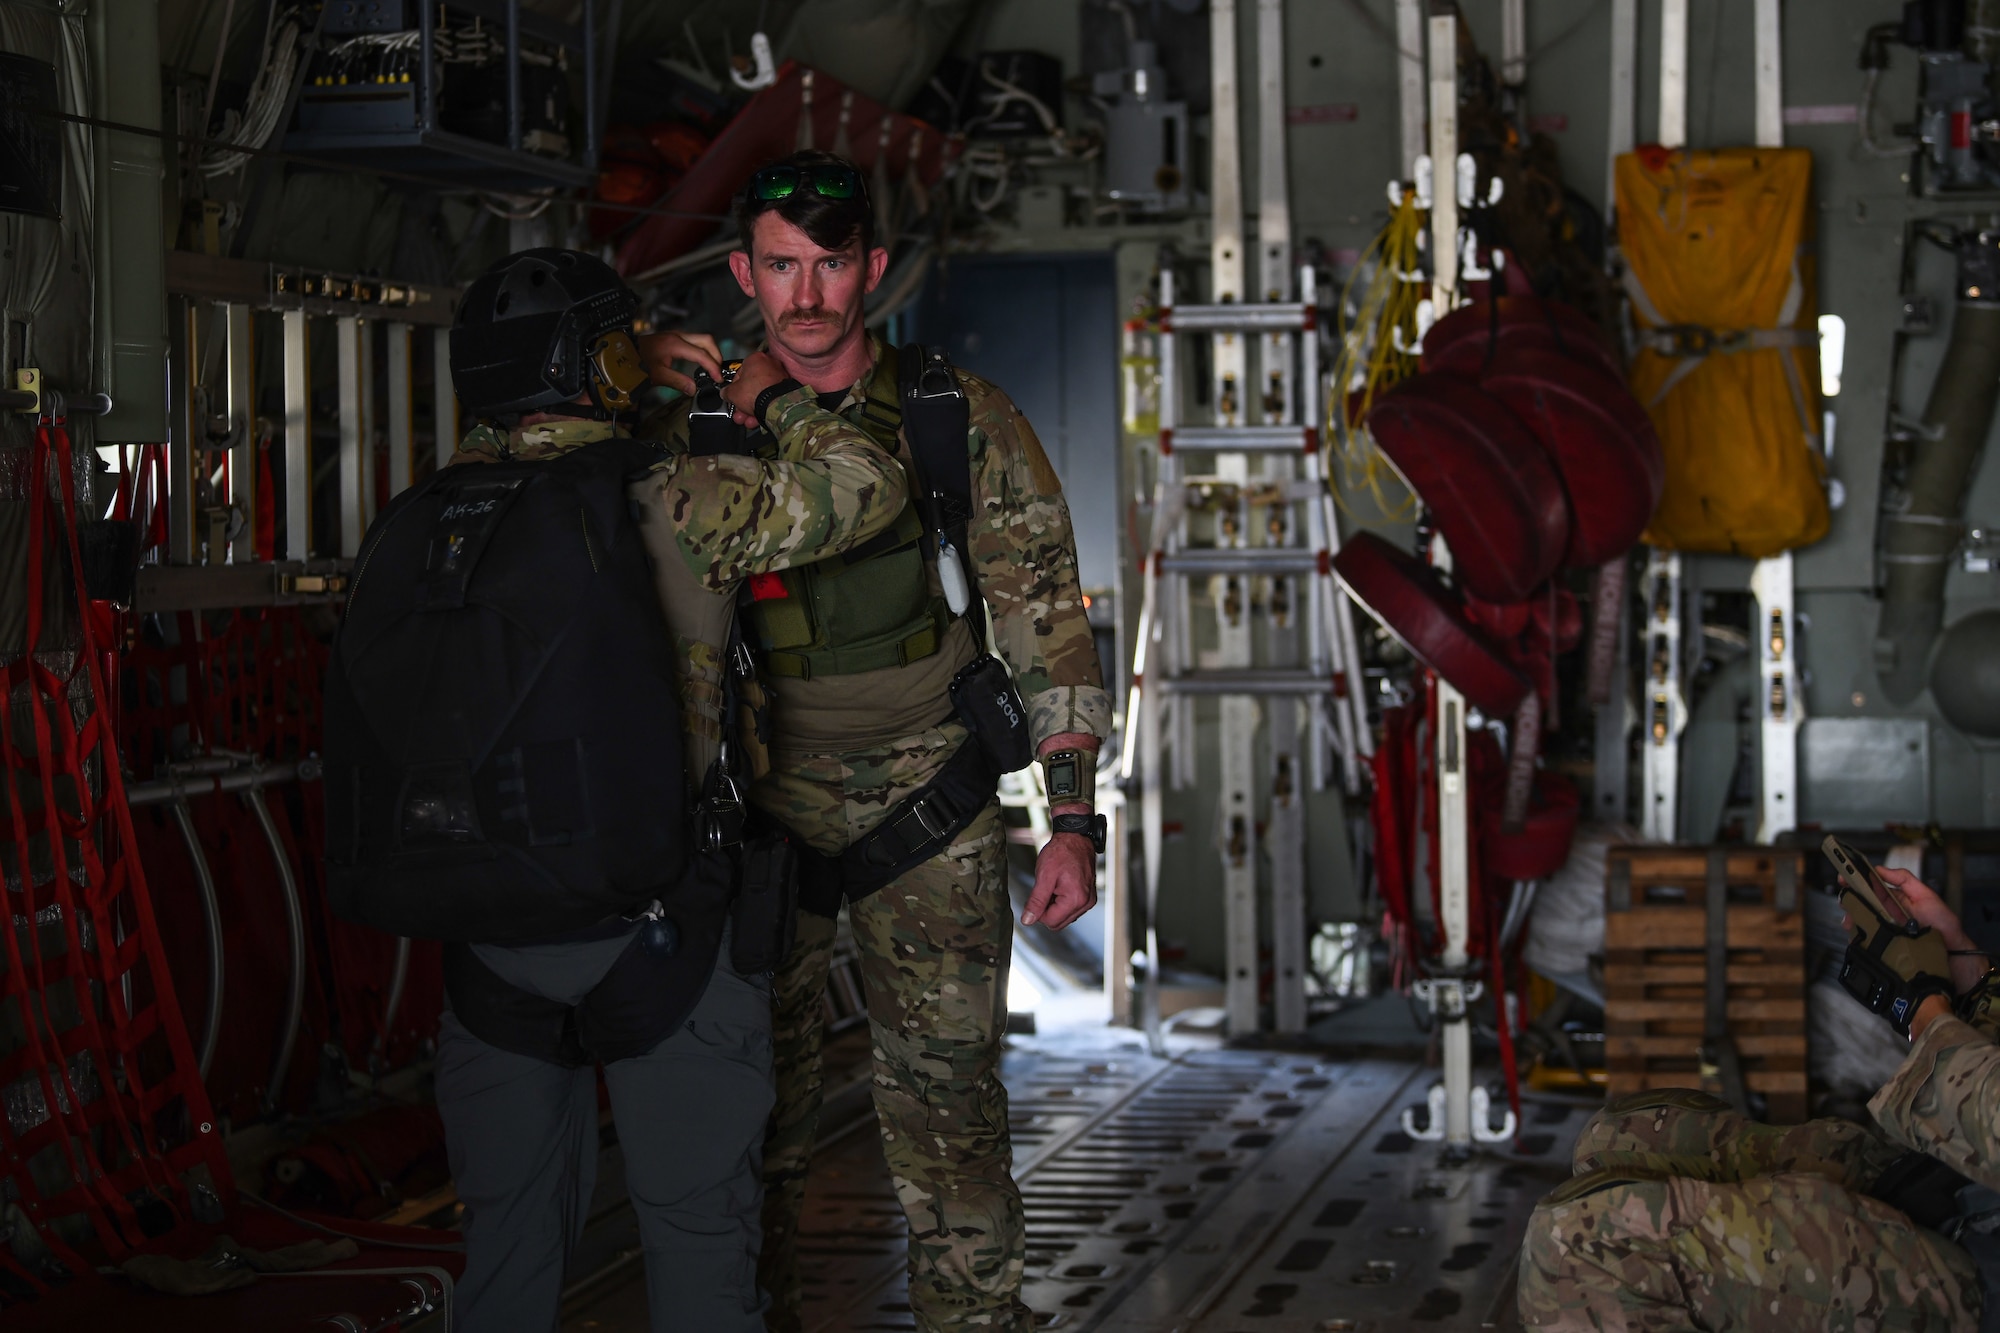 Two U.S. Air Force pararescuemen assigned to the 82nd Expeditionary Rescue Squadron, check one another's parachutes aboard a U.S. Marine Corps KC-130J Super Hercules at Camp Lemonnier, Djibouti, Feb. 15, 2021. The 82nd ERQS maintains jump proficiency to provide secure, reliable, flexible combat search, rescue, and recovery capabilities in support of U.S. Africa Command in North and East Africa. They also serve as U.S. Air Forces Africa’s personnel recovery liaison, coordinating efforts between coalition and joint forces in East Africa and enhancing the combatant command’s Warfighter Recovery Network. (U.S. Air Force photo by Senior Airman Ericka A. Woolever)